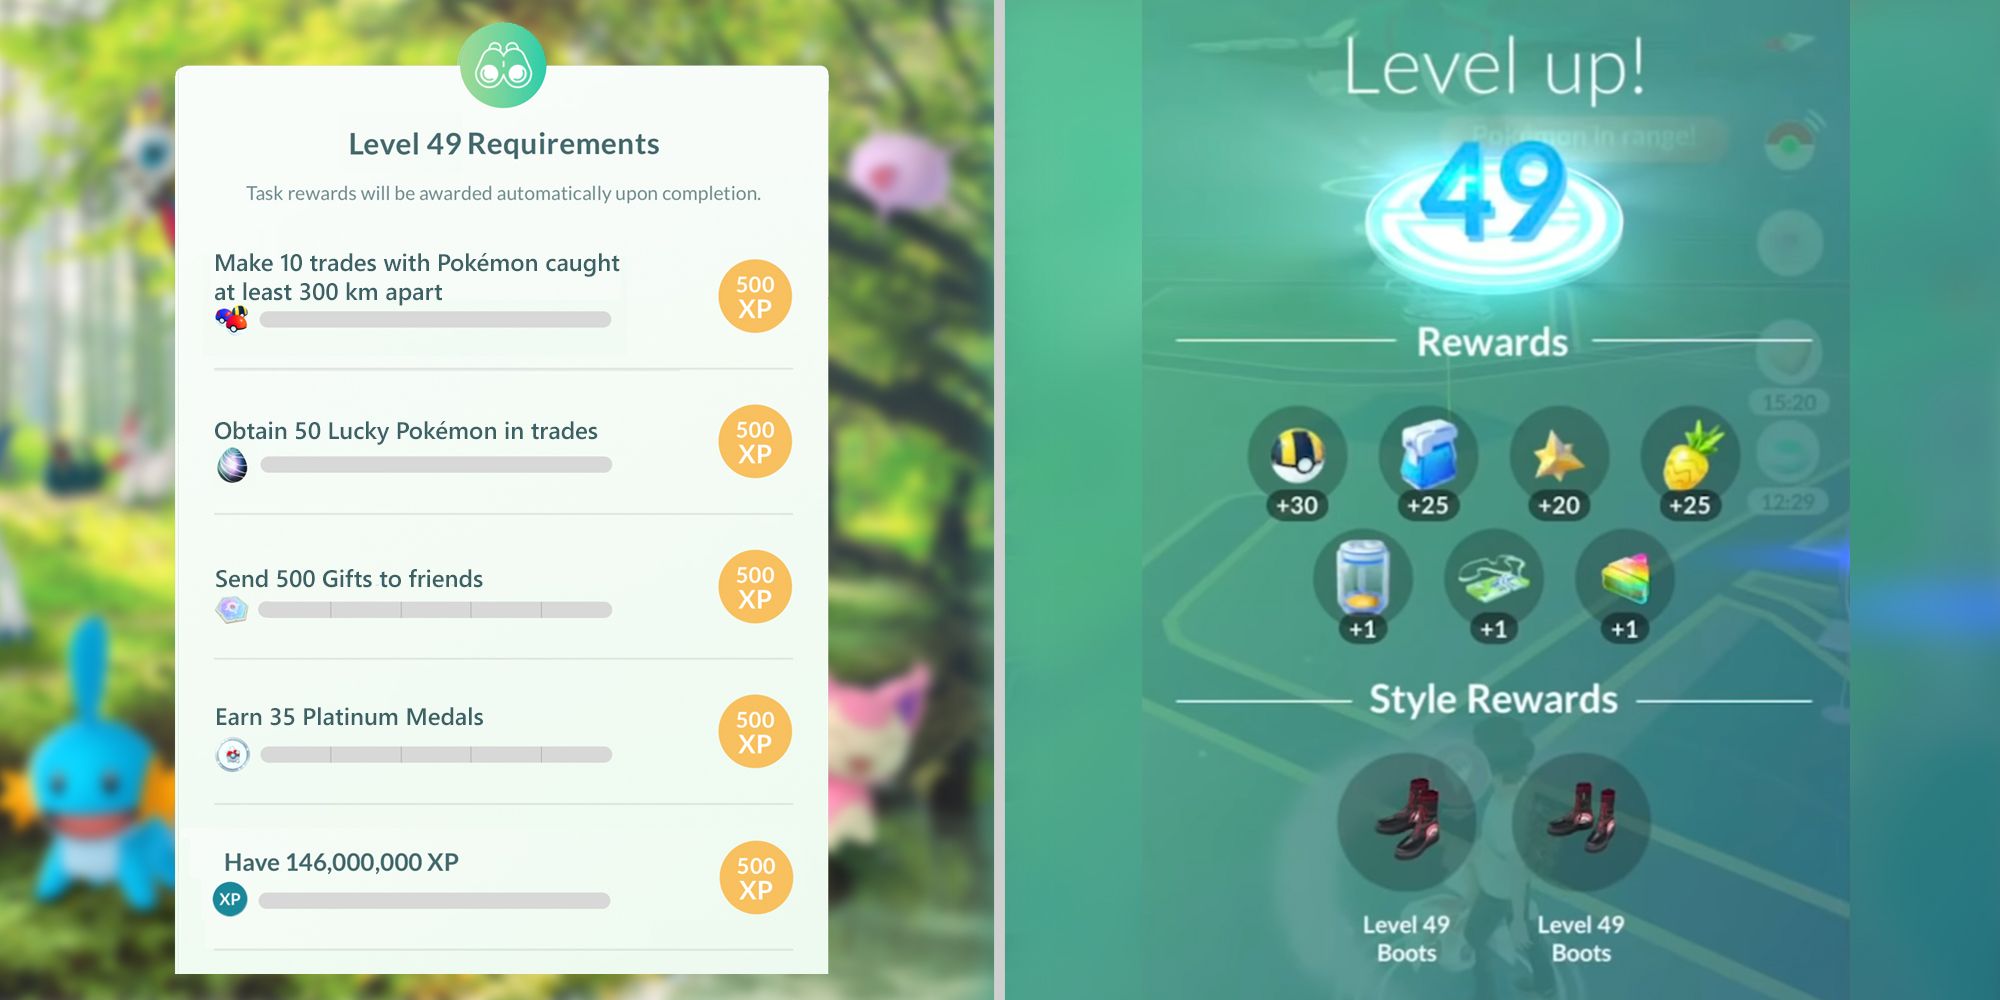 Requirements and rewards for level 49 in Pokemon Go